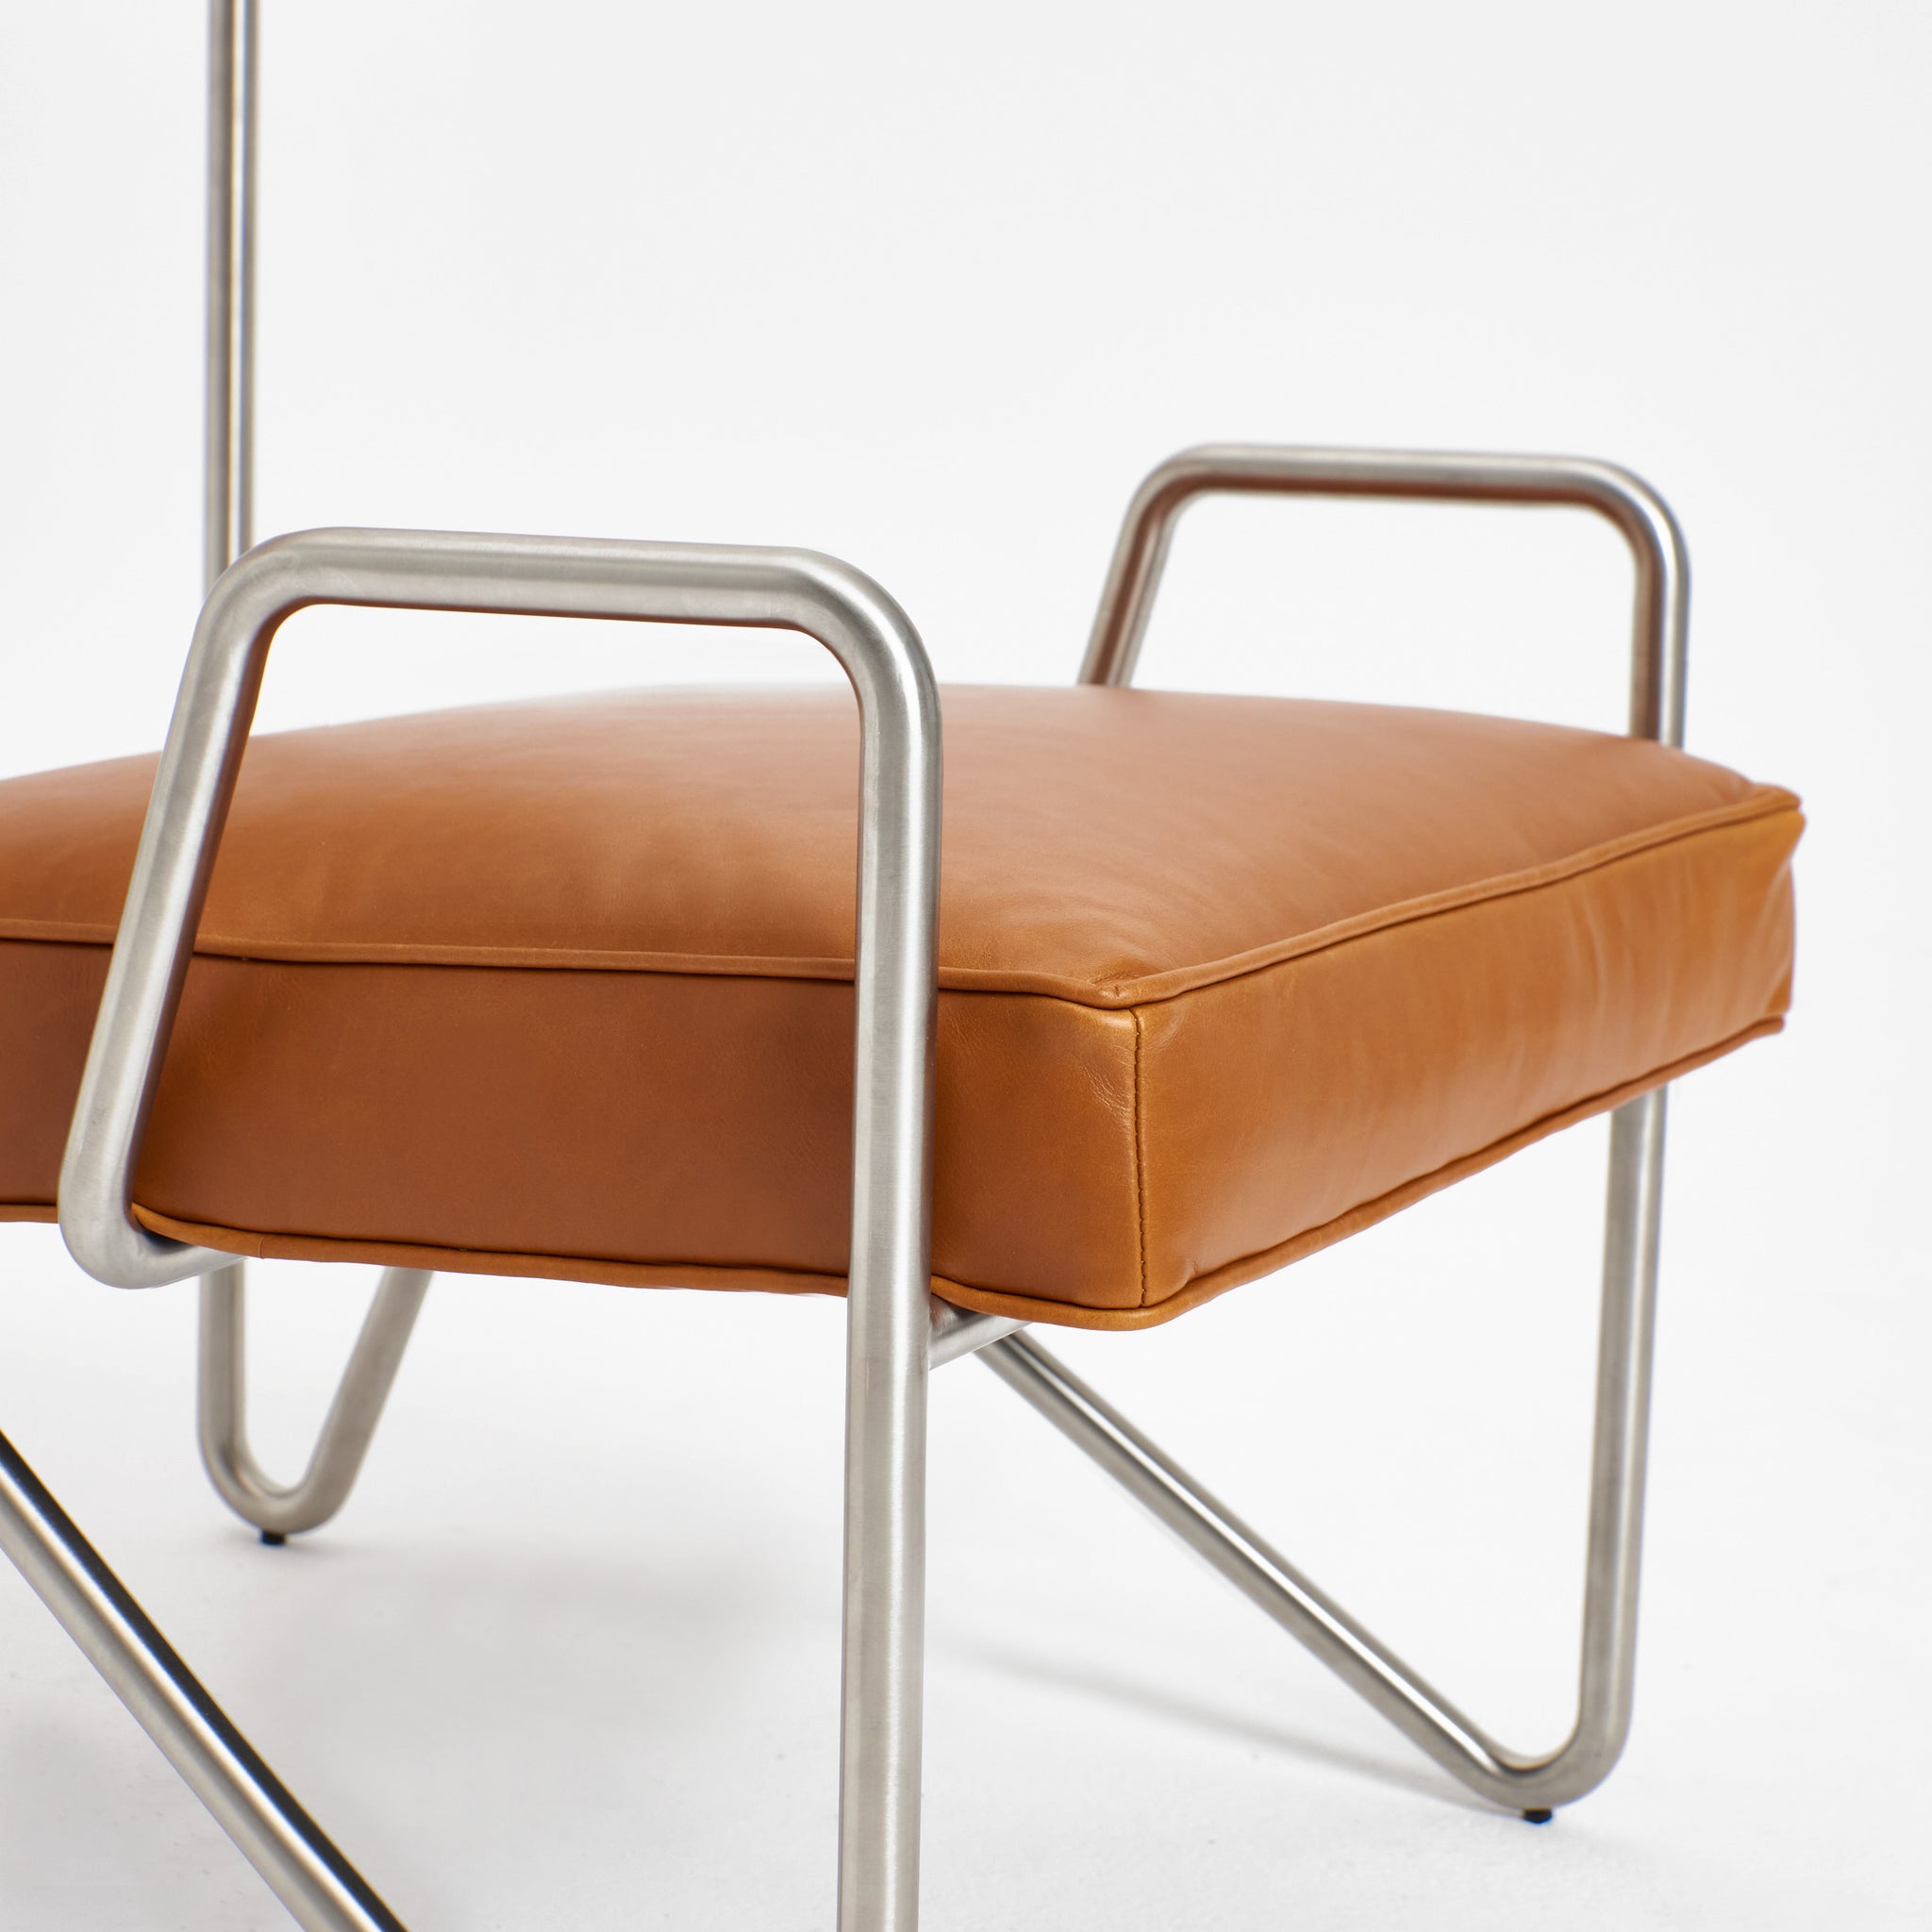 Larry's Lounge Chair - Leather